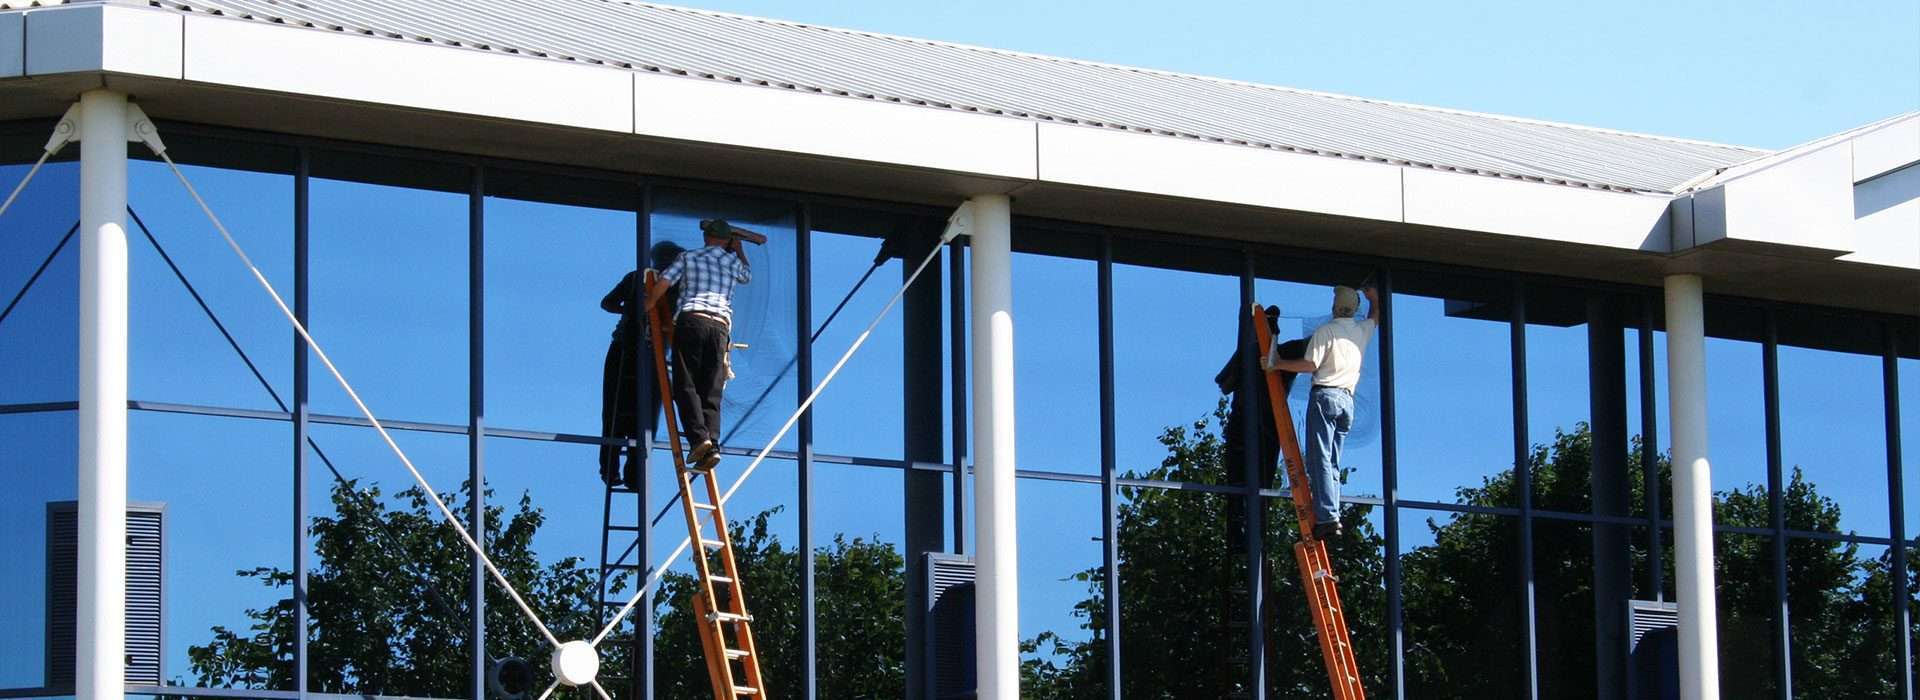 Facade Cleaning Services In Sahibabad Industrial Area Site 4, Ghaziabad